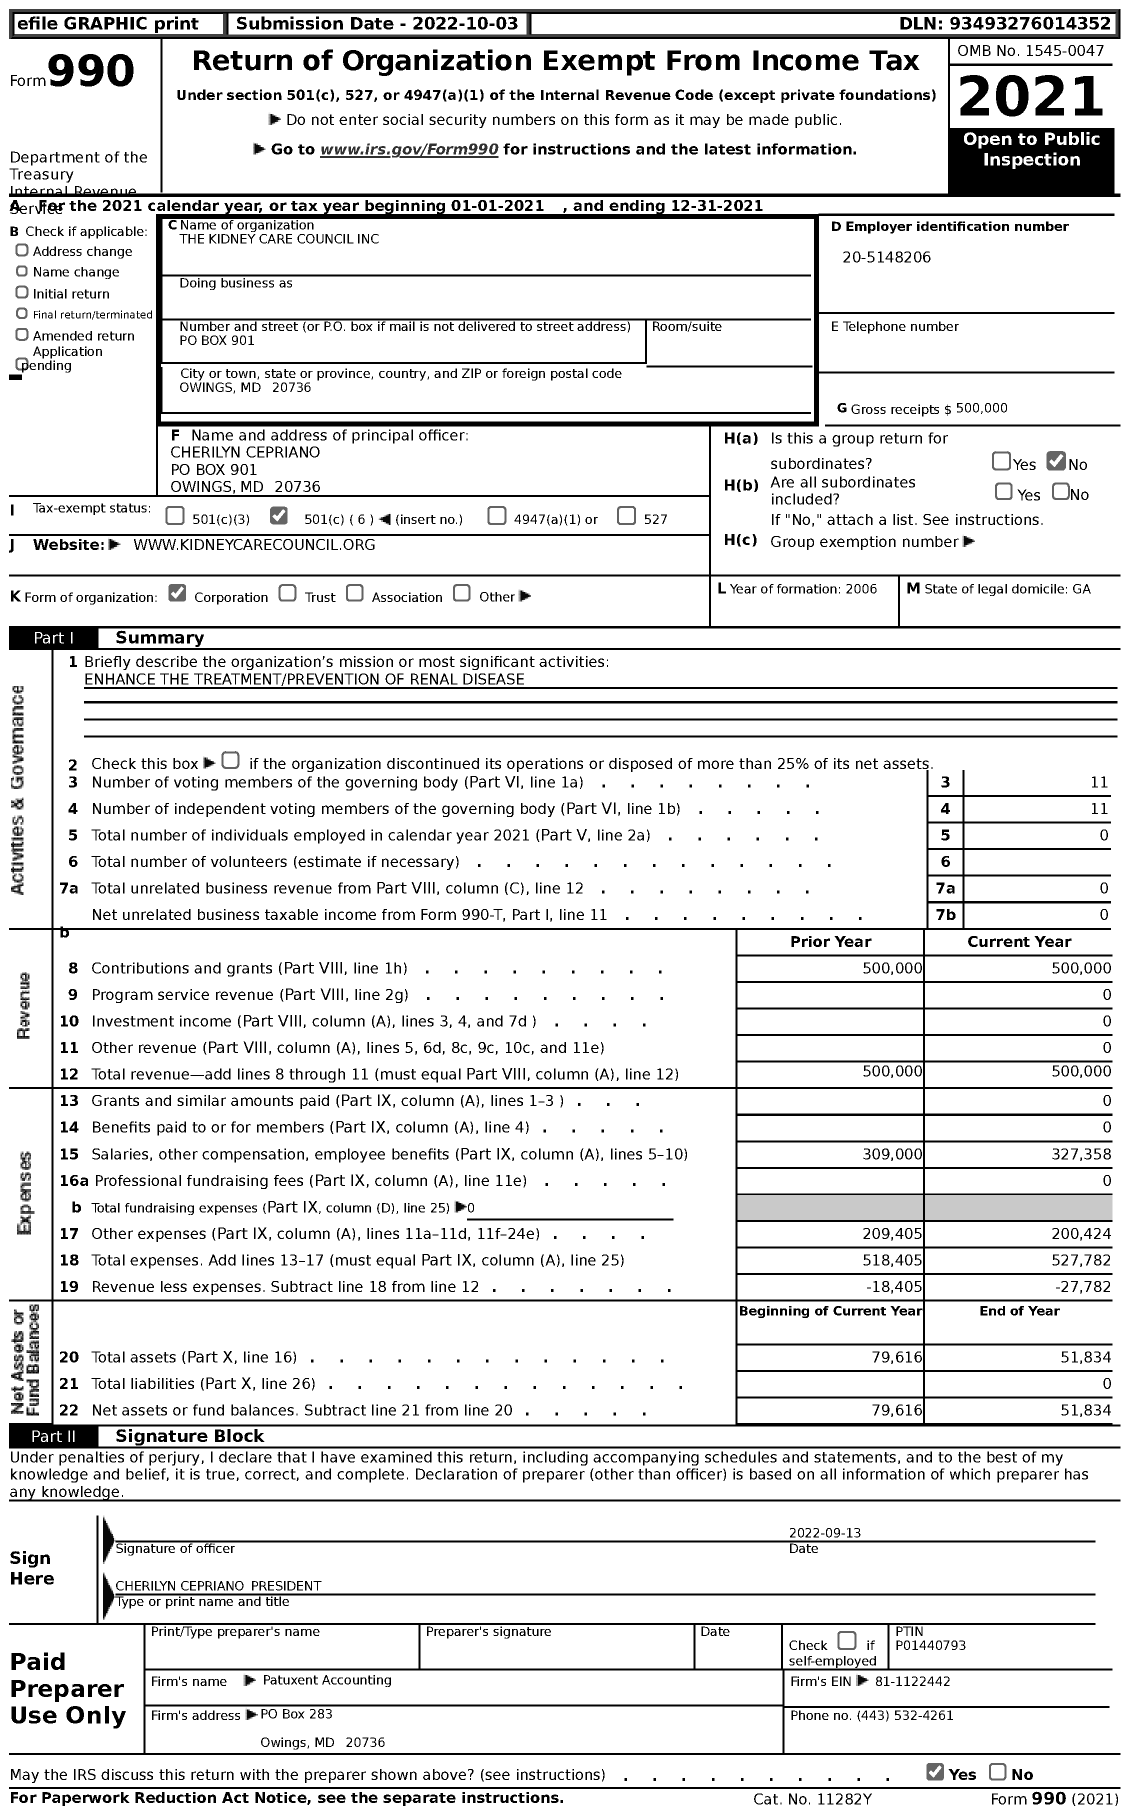 Image of first page of 2021 Form 990 for Kidney Care Council (KCC)